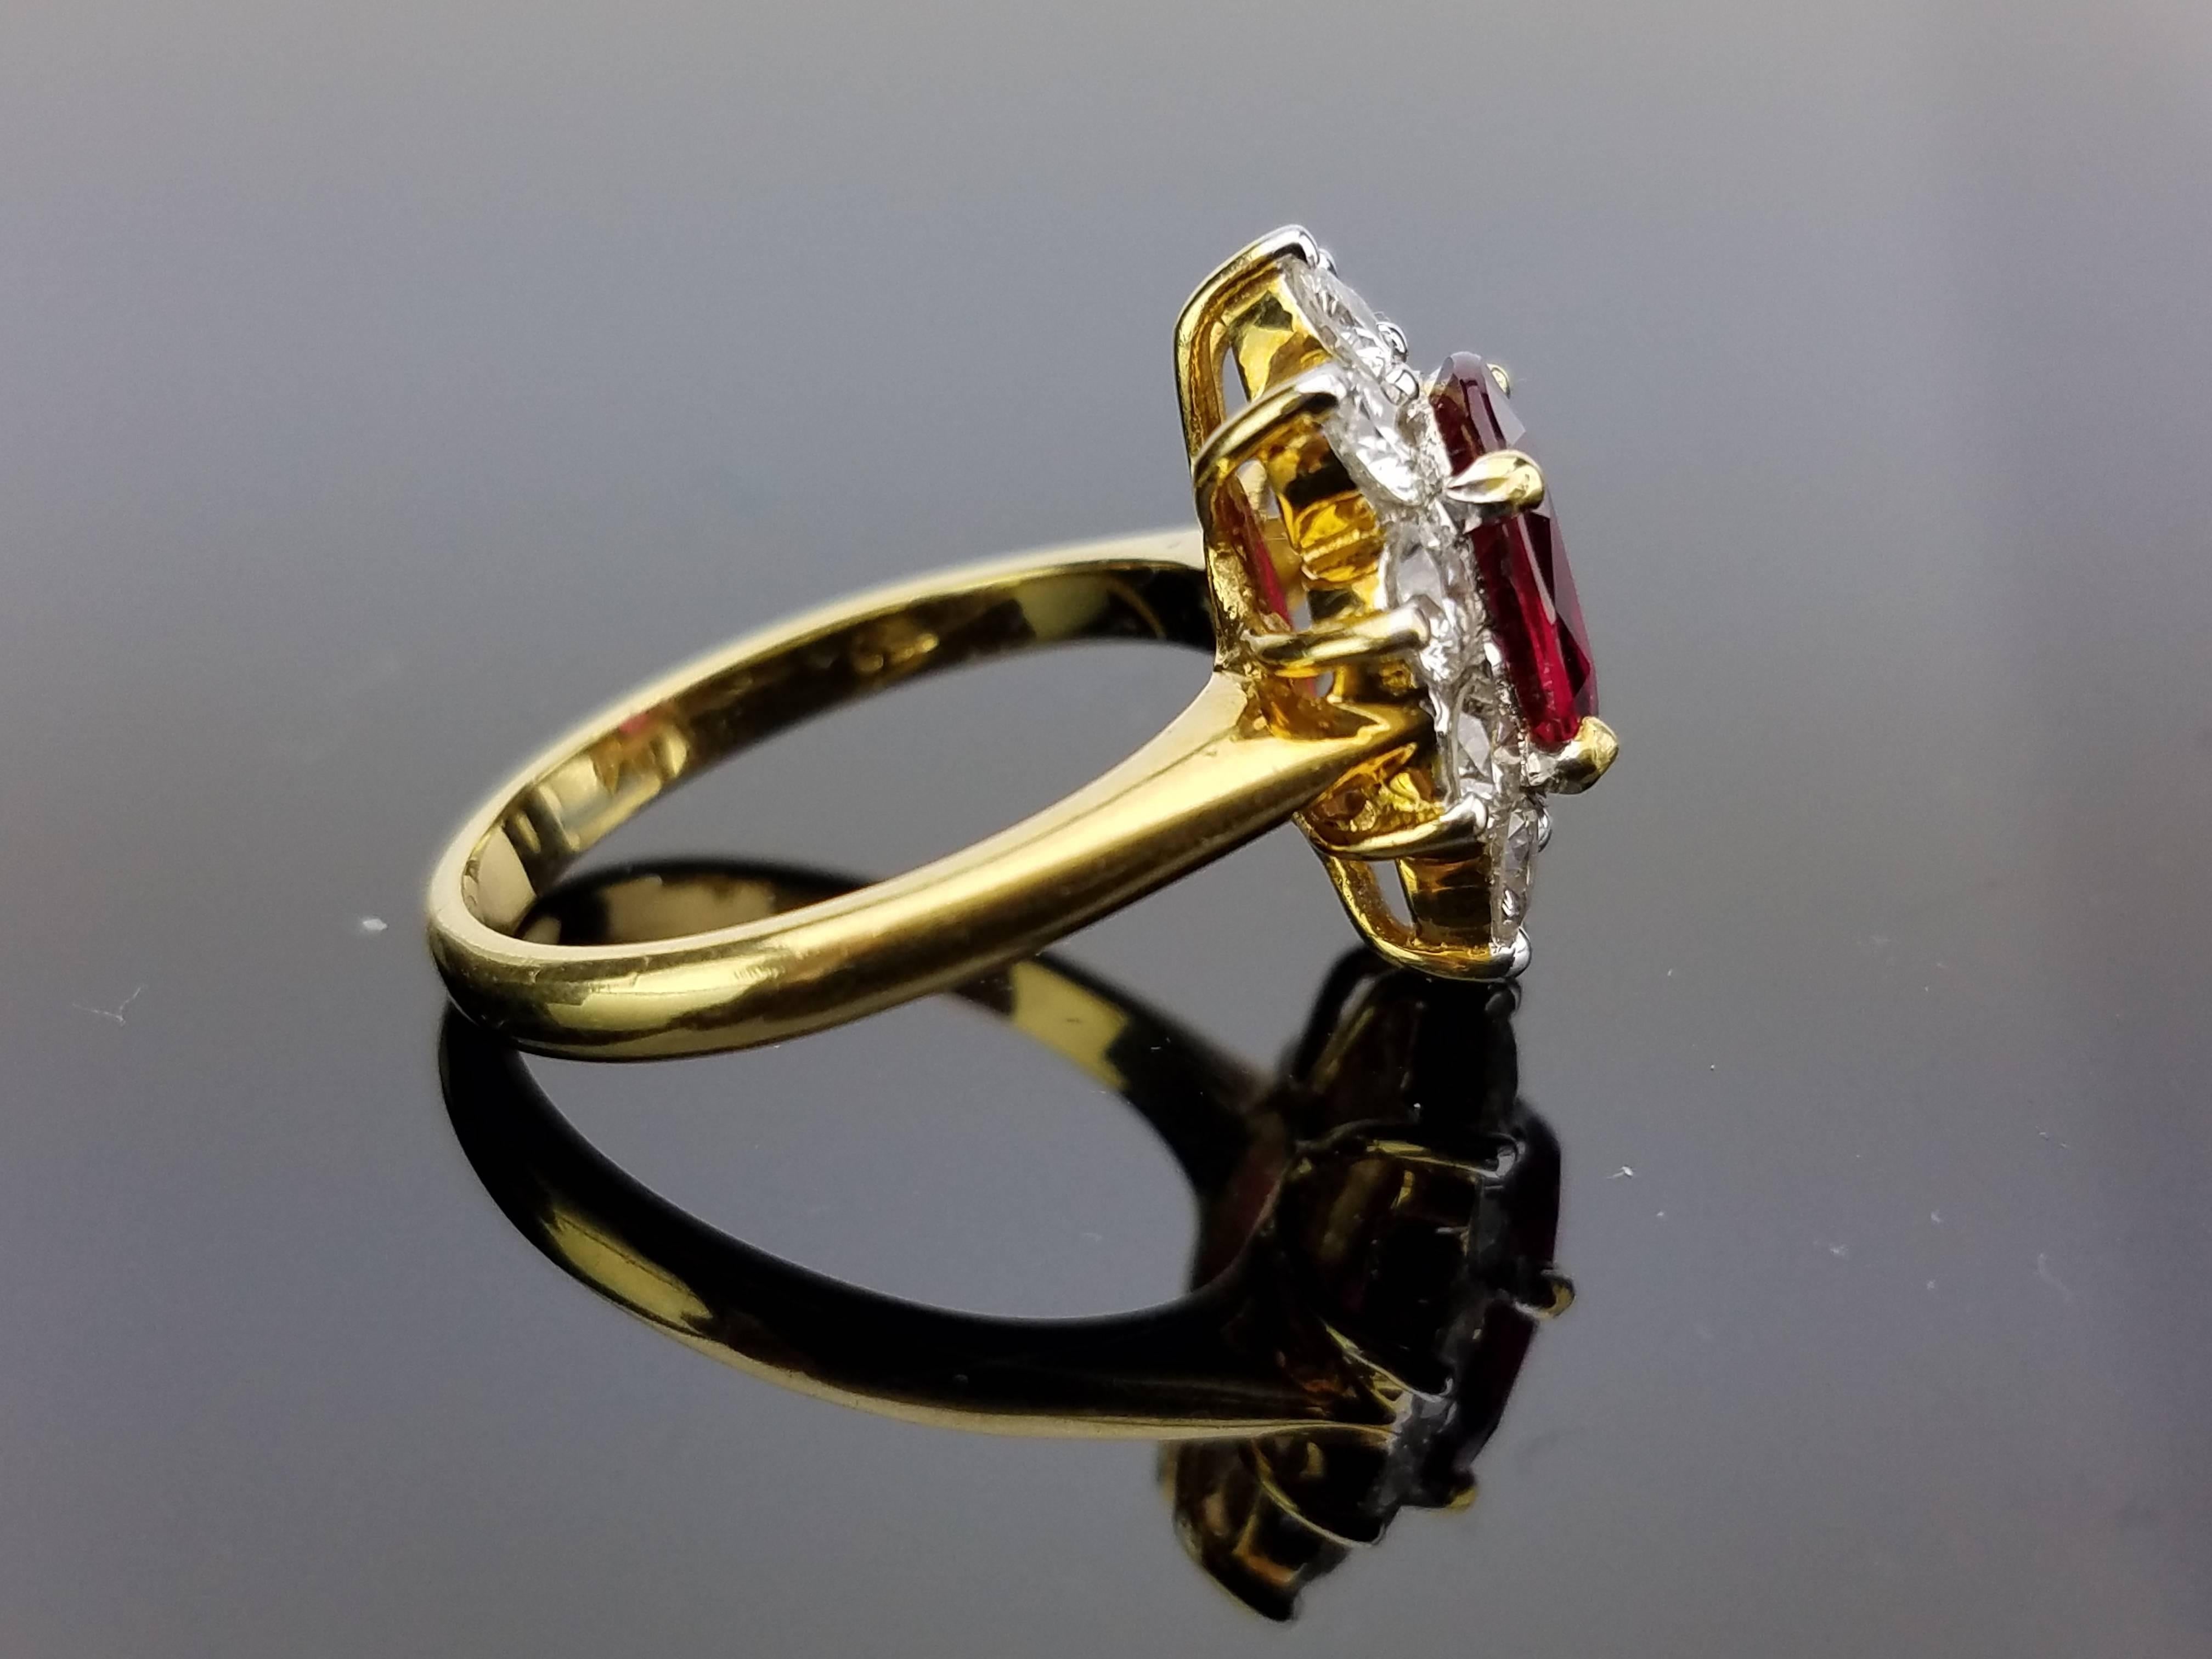 Beautiful Mozambique Ruby with DIamonds set in 18K yellow Gold. 

Stone Details: 
Stone: Mozambique Ruby
Cut: Oval
Carat Weight: 3 Carat

Diamond Details:
Cut: Brilliant cut
Total Carat Weight: 0.91 carat
Quality: VS/SI , H/I

18K Gold: 5.15 grams